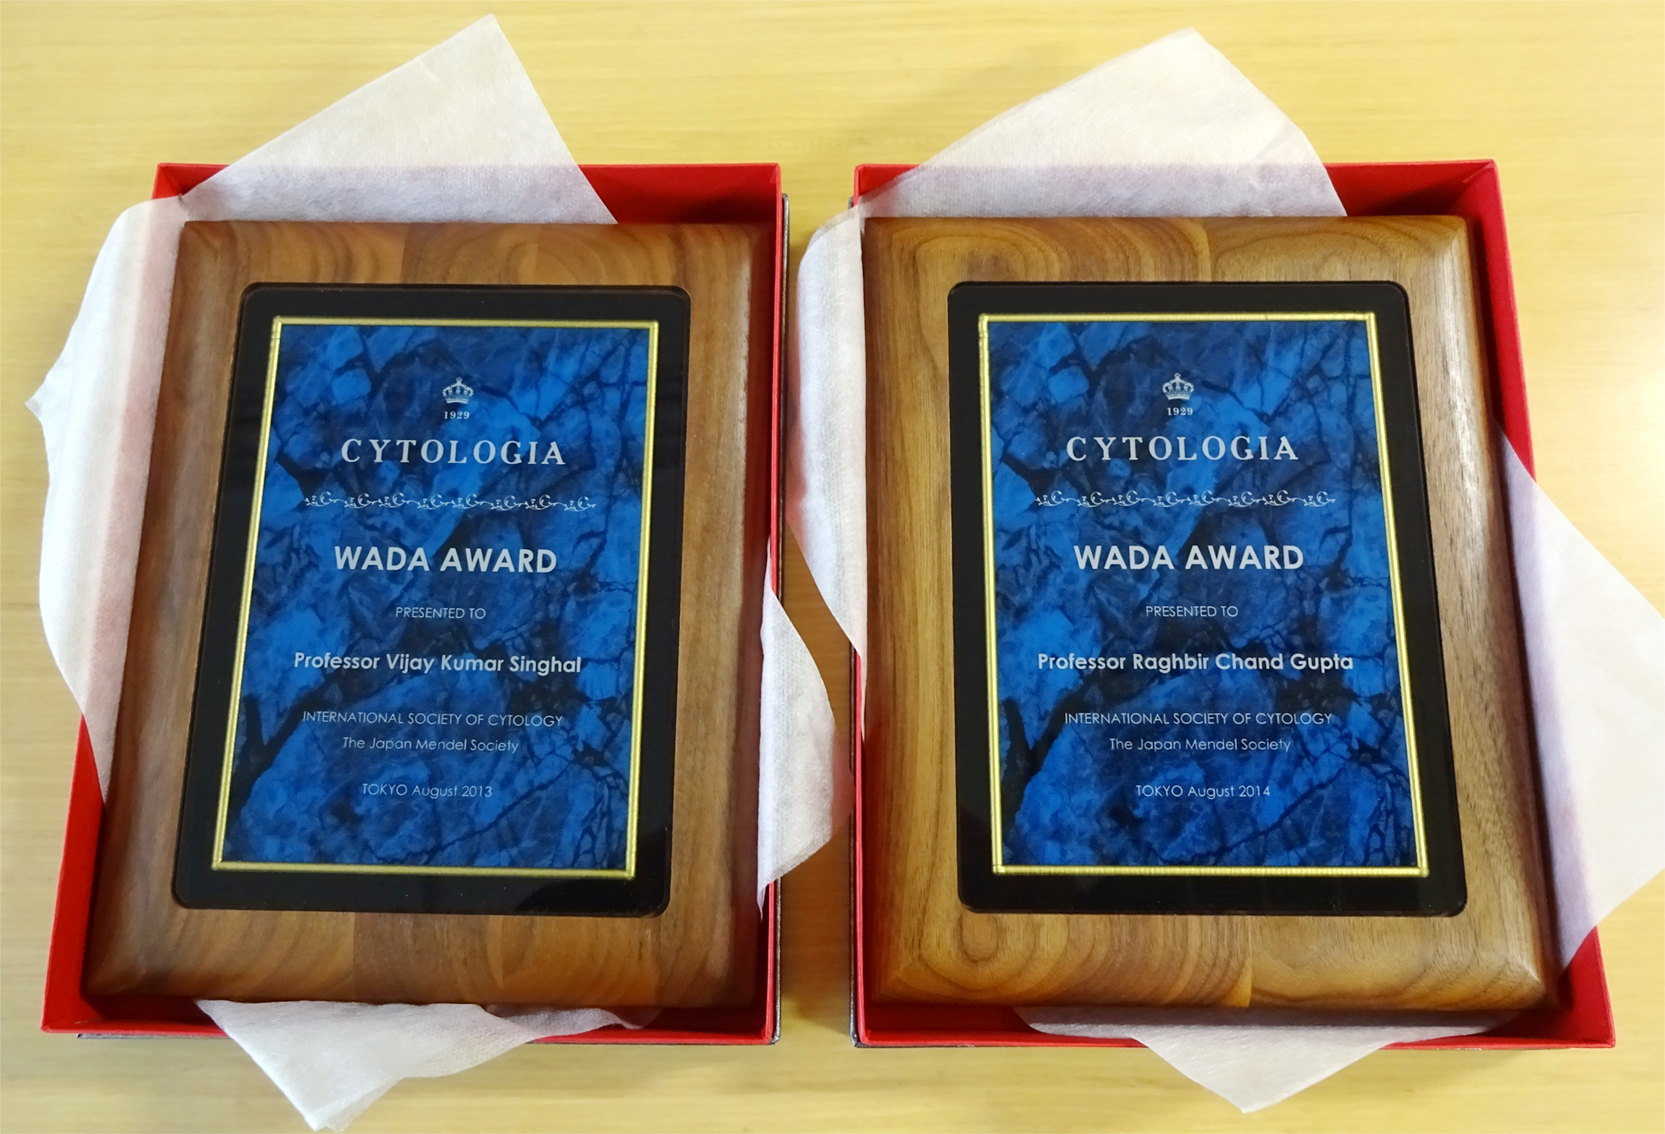 The third and the fourth Wada Memorial Award plates